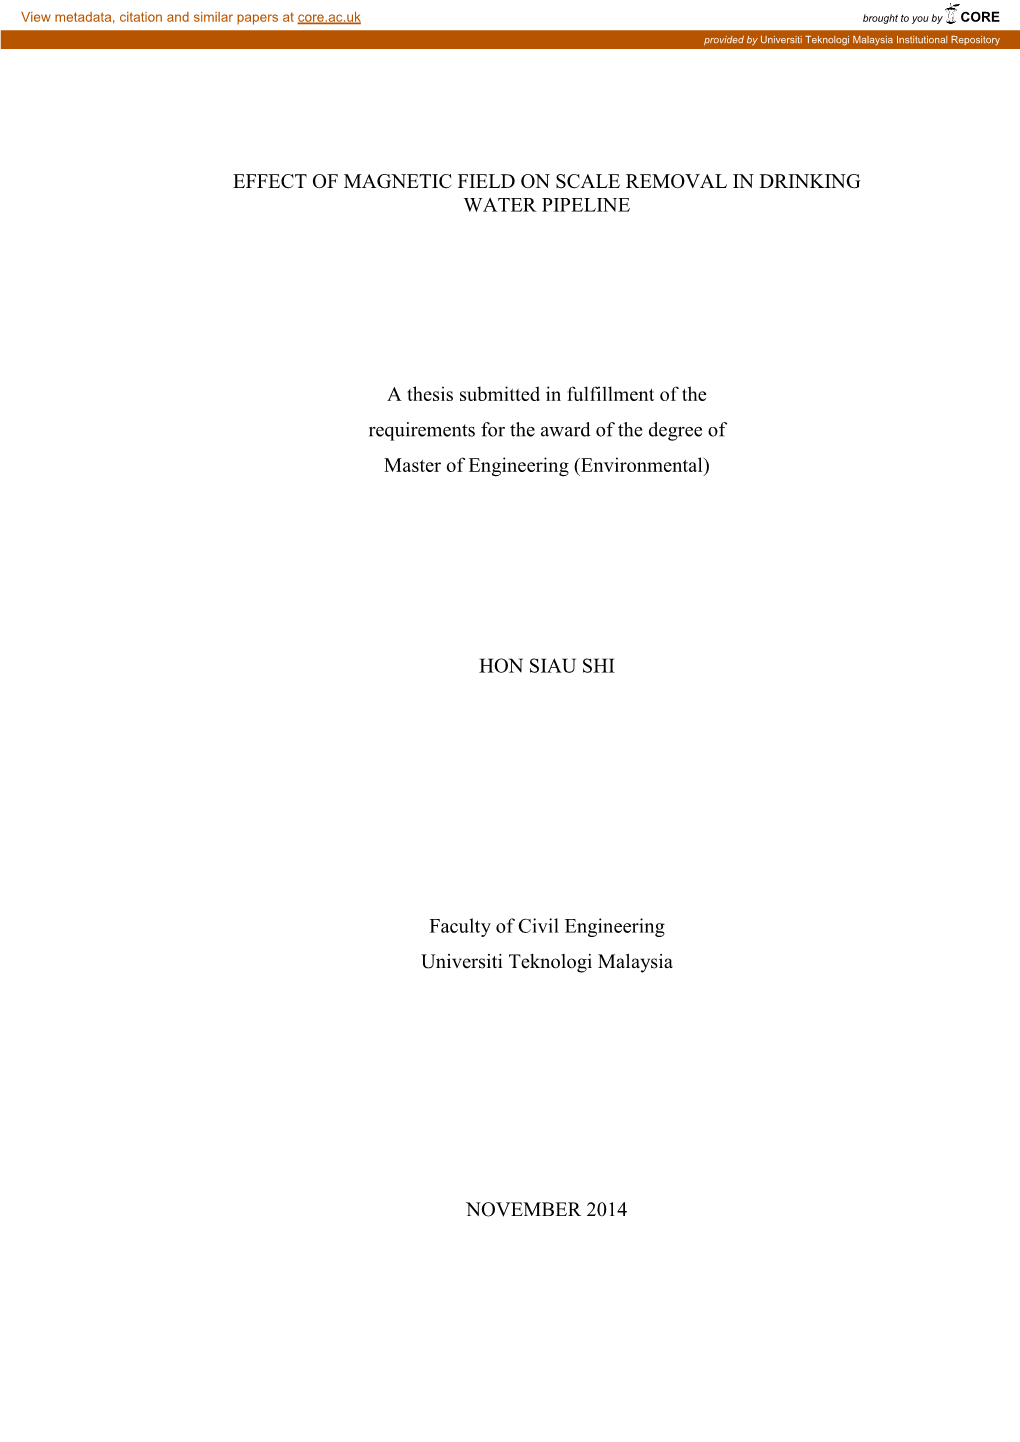 EFFECT of MAGNETIC FIELD on SCALE REMOVAL in DRINKING WATER PIPELINE a Thesis Submitted in Fulfillment of the Requirements for T